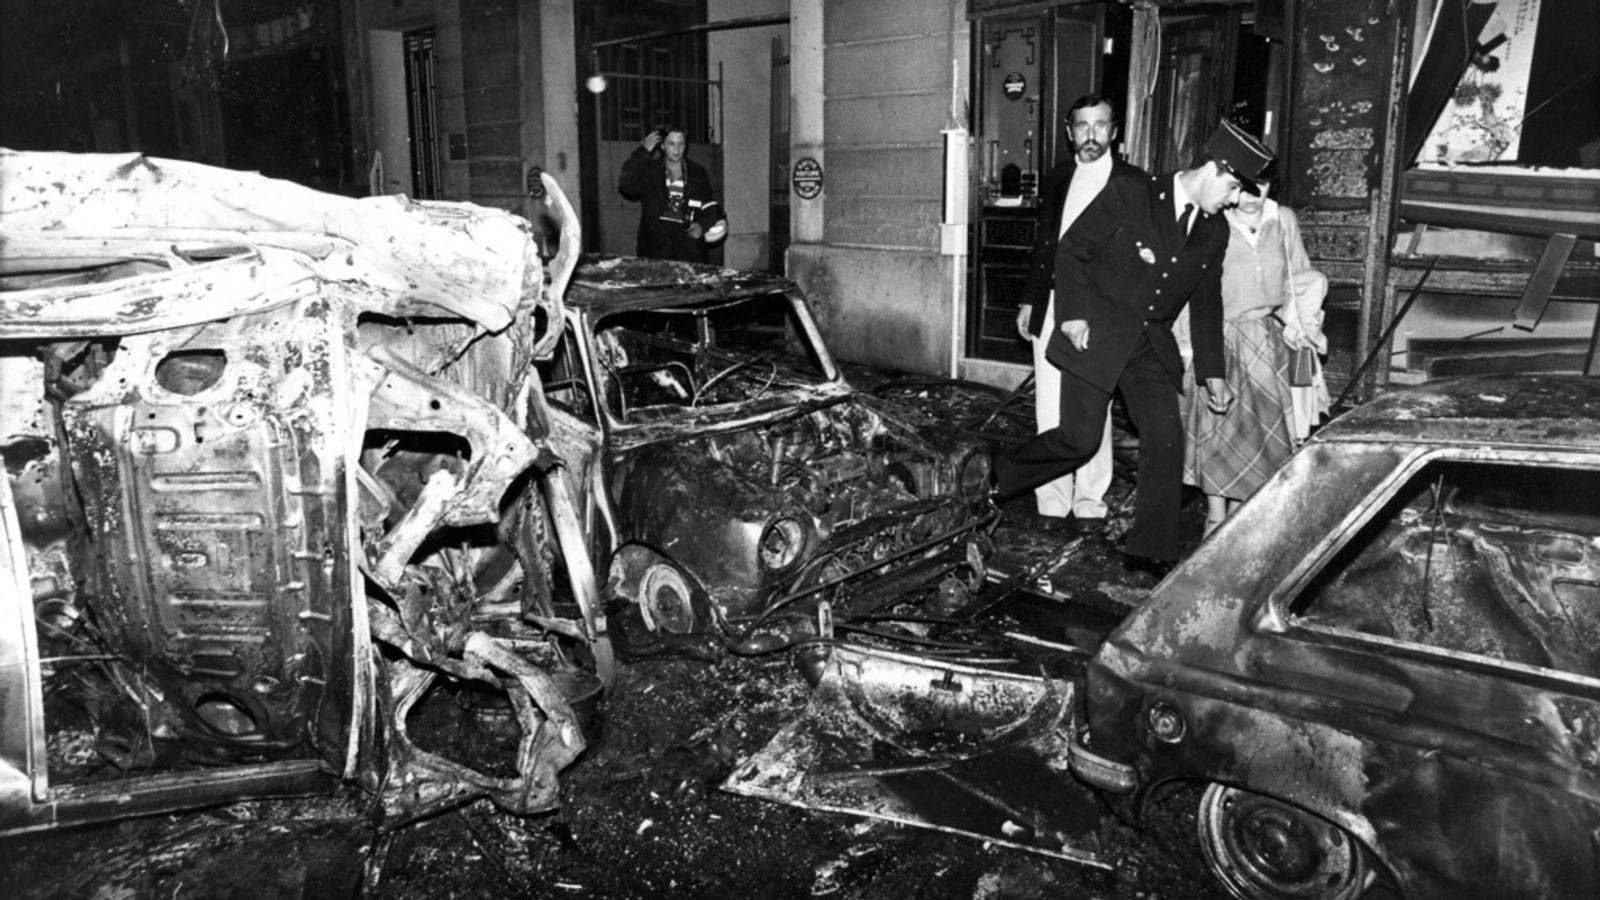 Lebanese-Canadian academic Hassan Diab convicted of 1980 Paris synagogue bombing